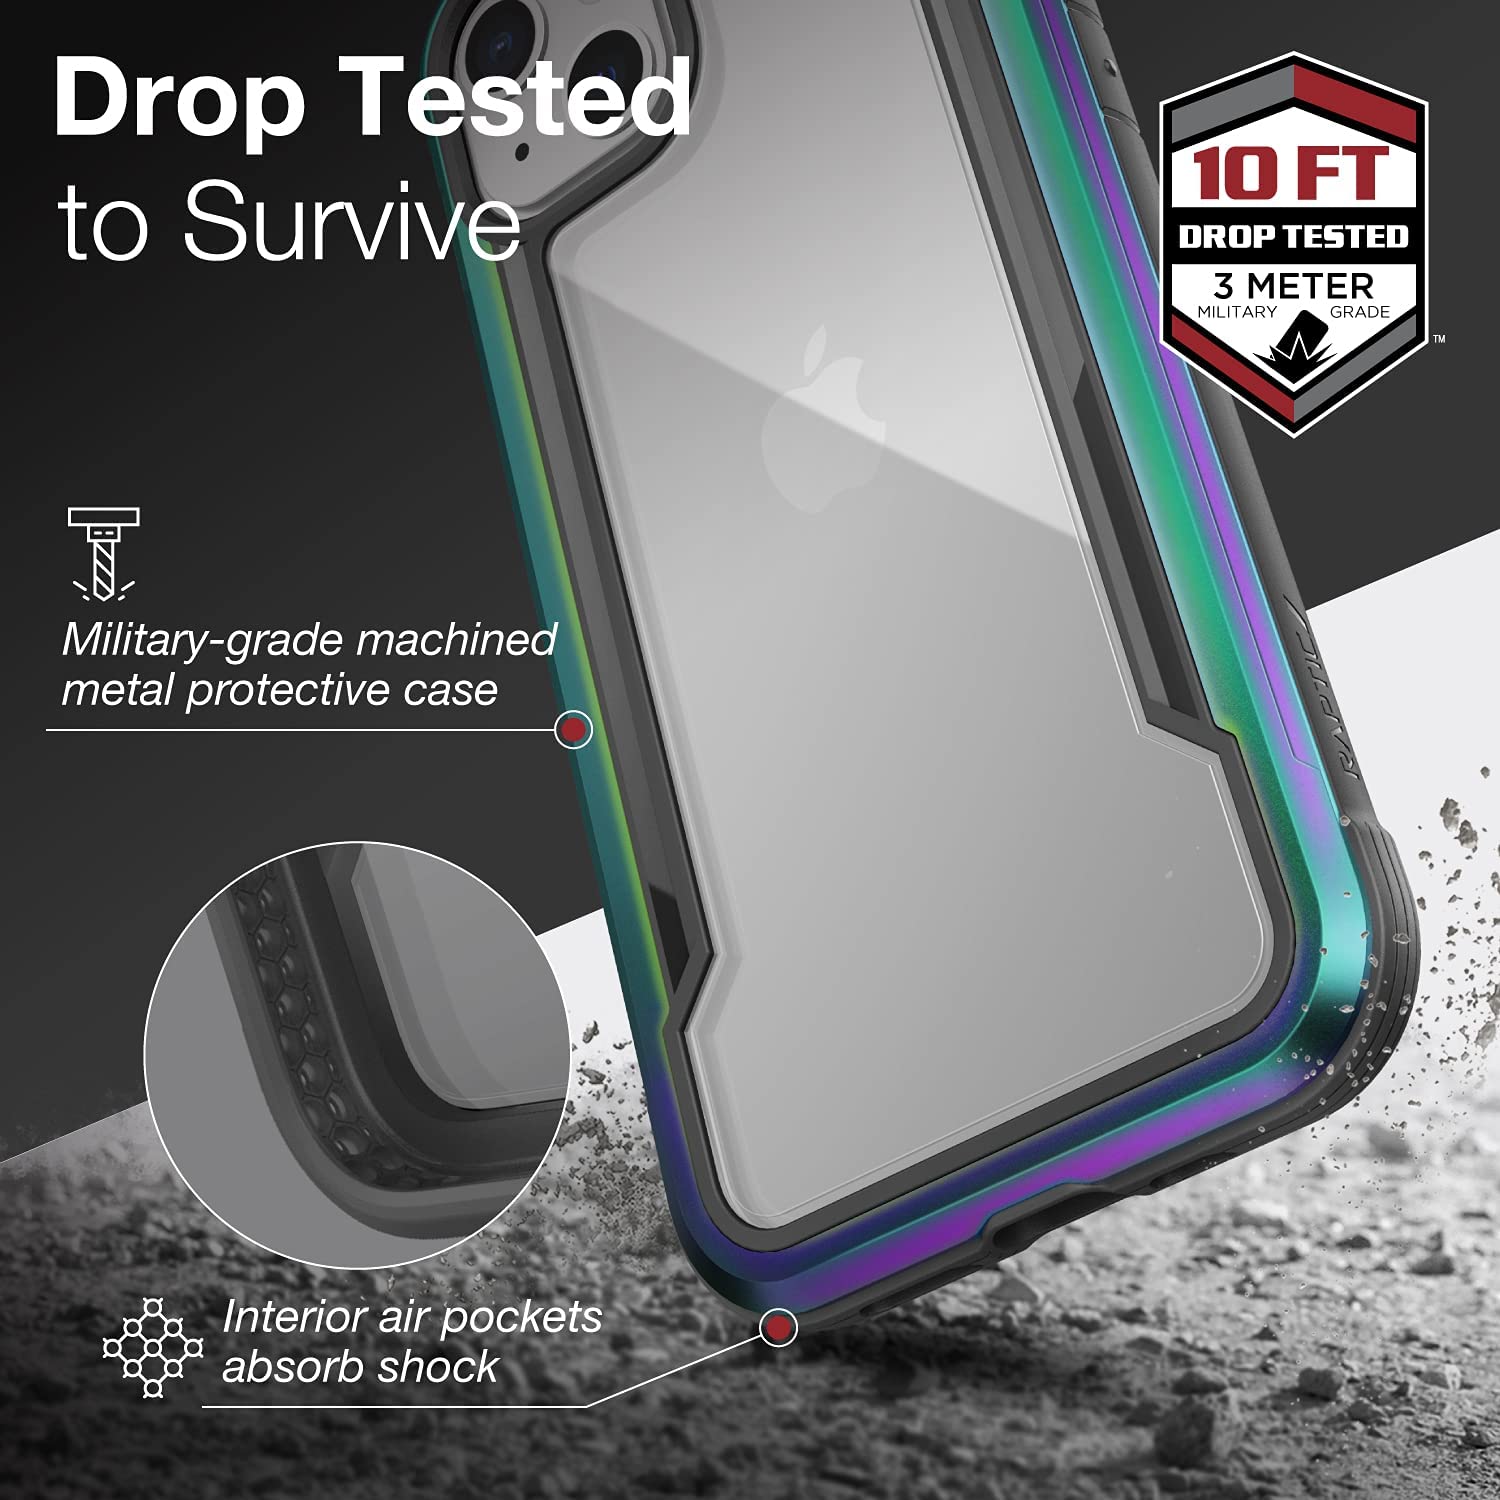 X-Doria Defence Raptic Shield iPhone 13 / Pro / Pro Max Shock Absorbing Protection, Durable Aluminum Frame, 10ft Drop Tested Case